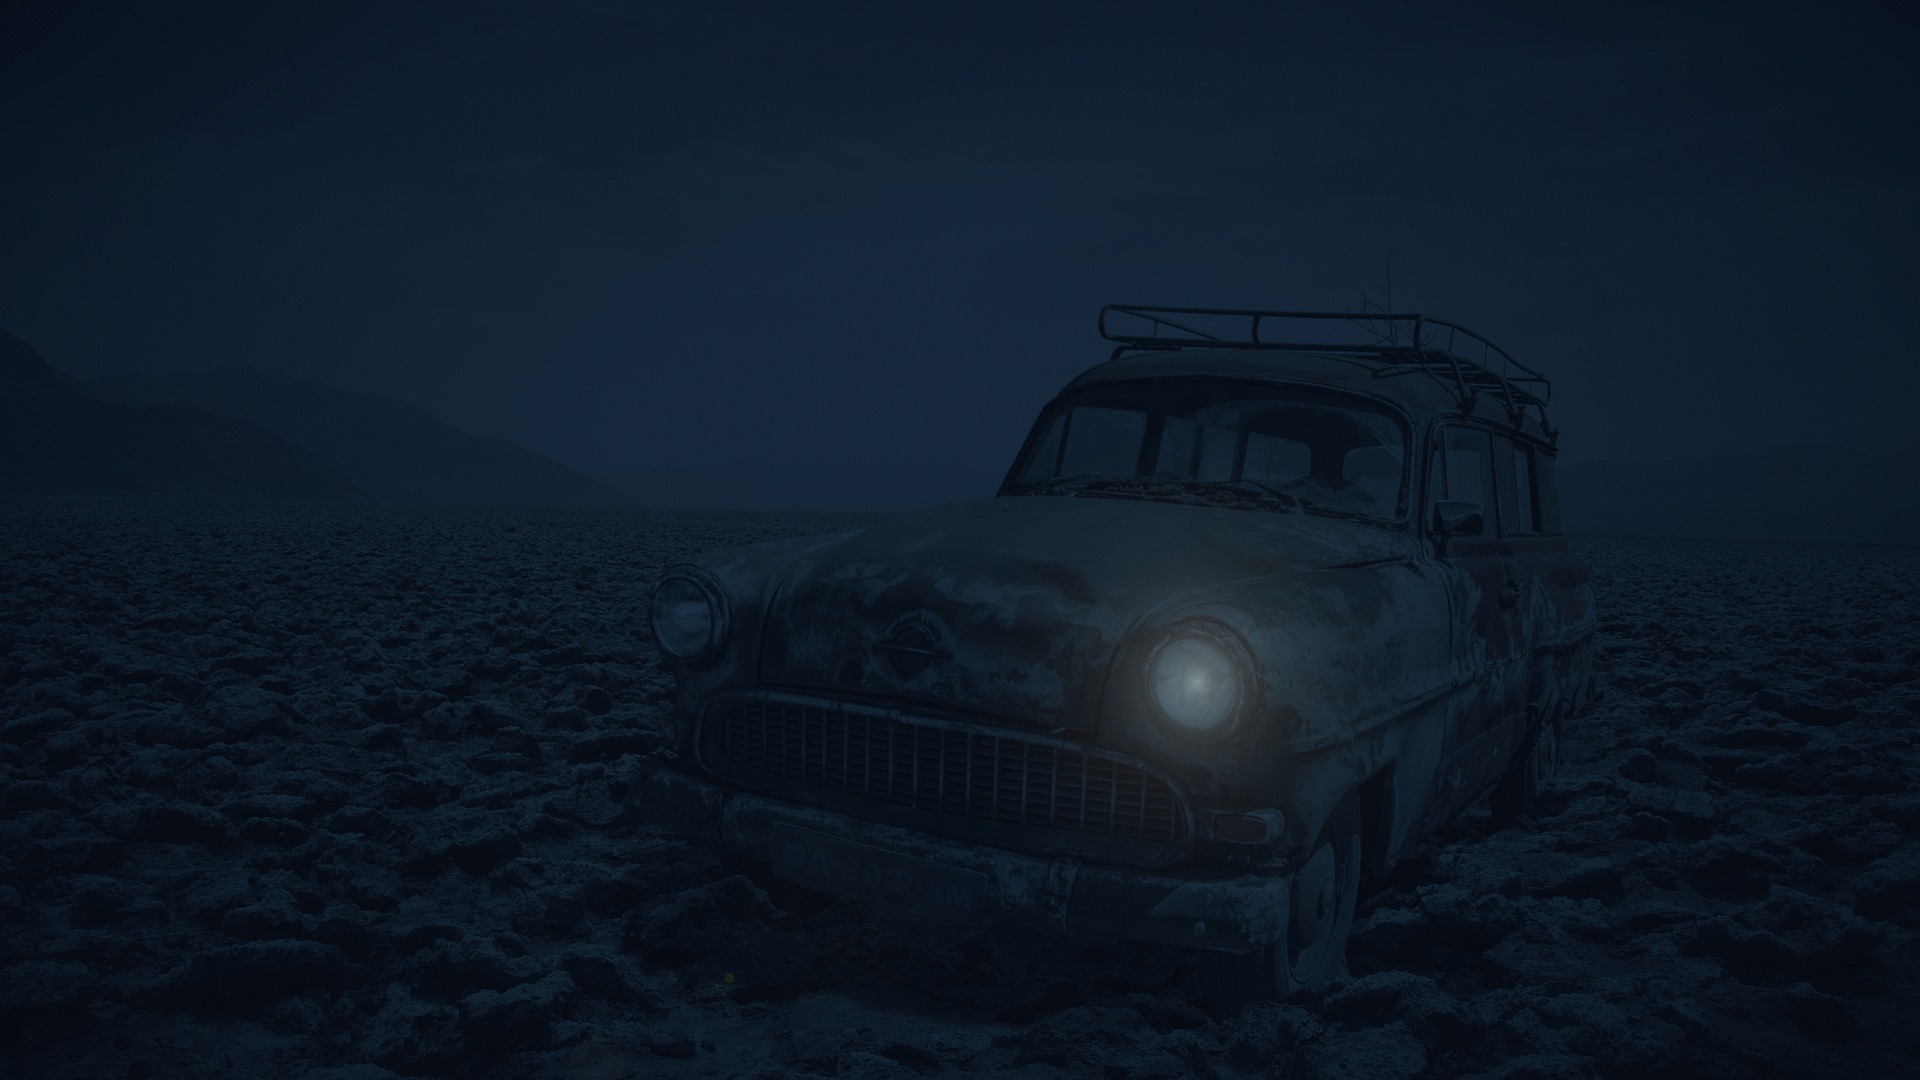 A car is hardly to be seen in the dark, because only one headlight is shining